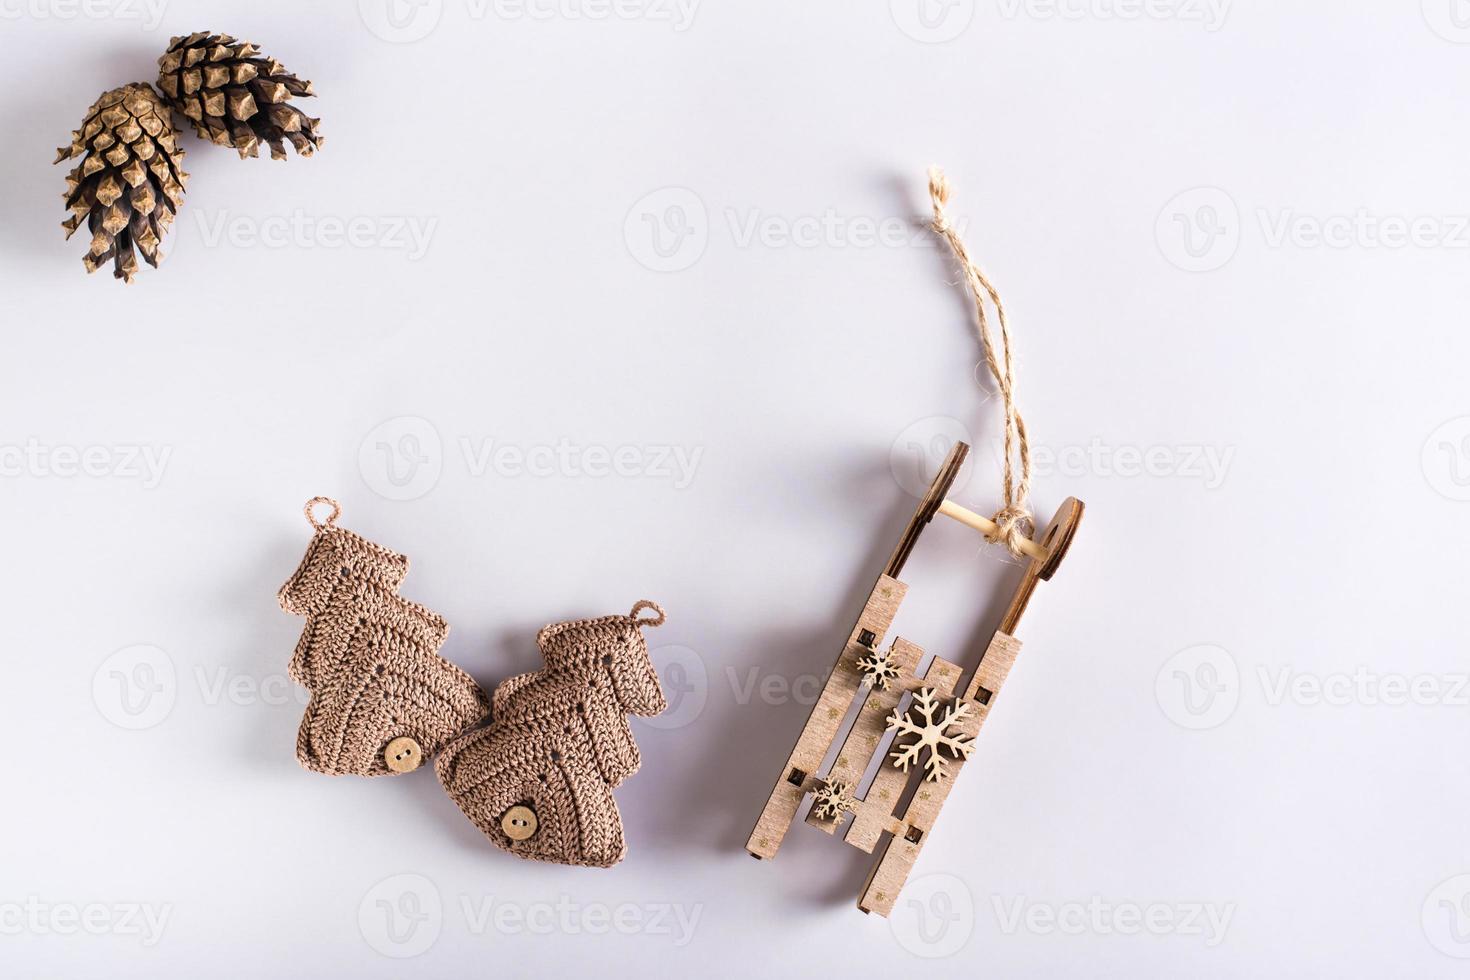 Two knitted fir trees, wooden sled and pine cones on a gray background. Handmade Christmas decor photo